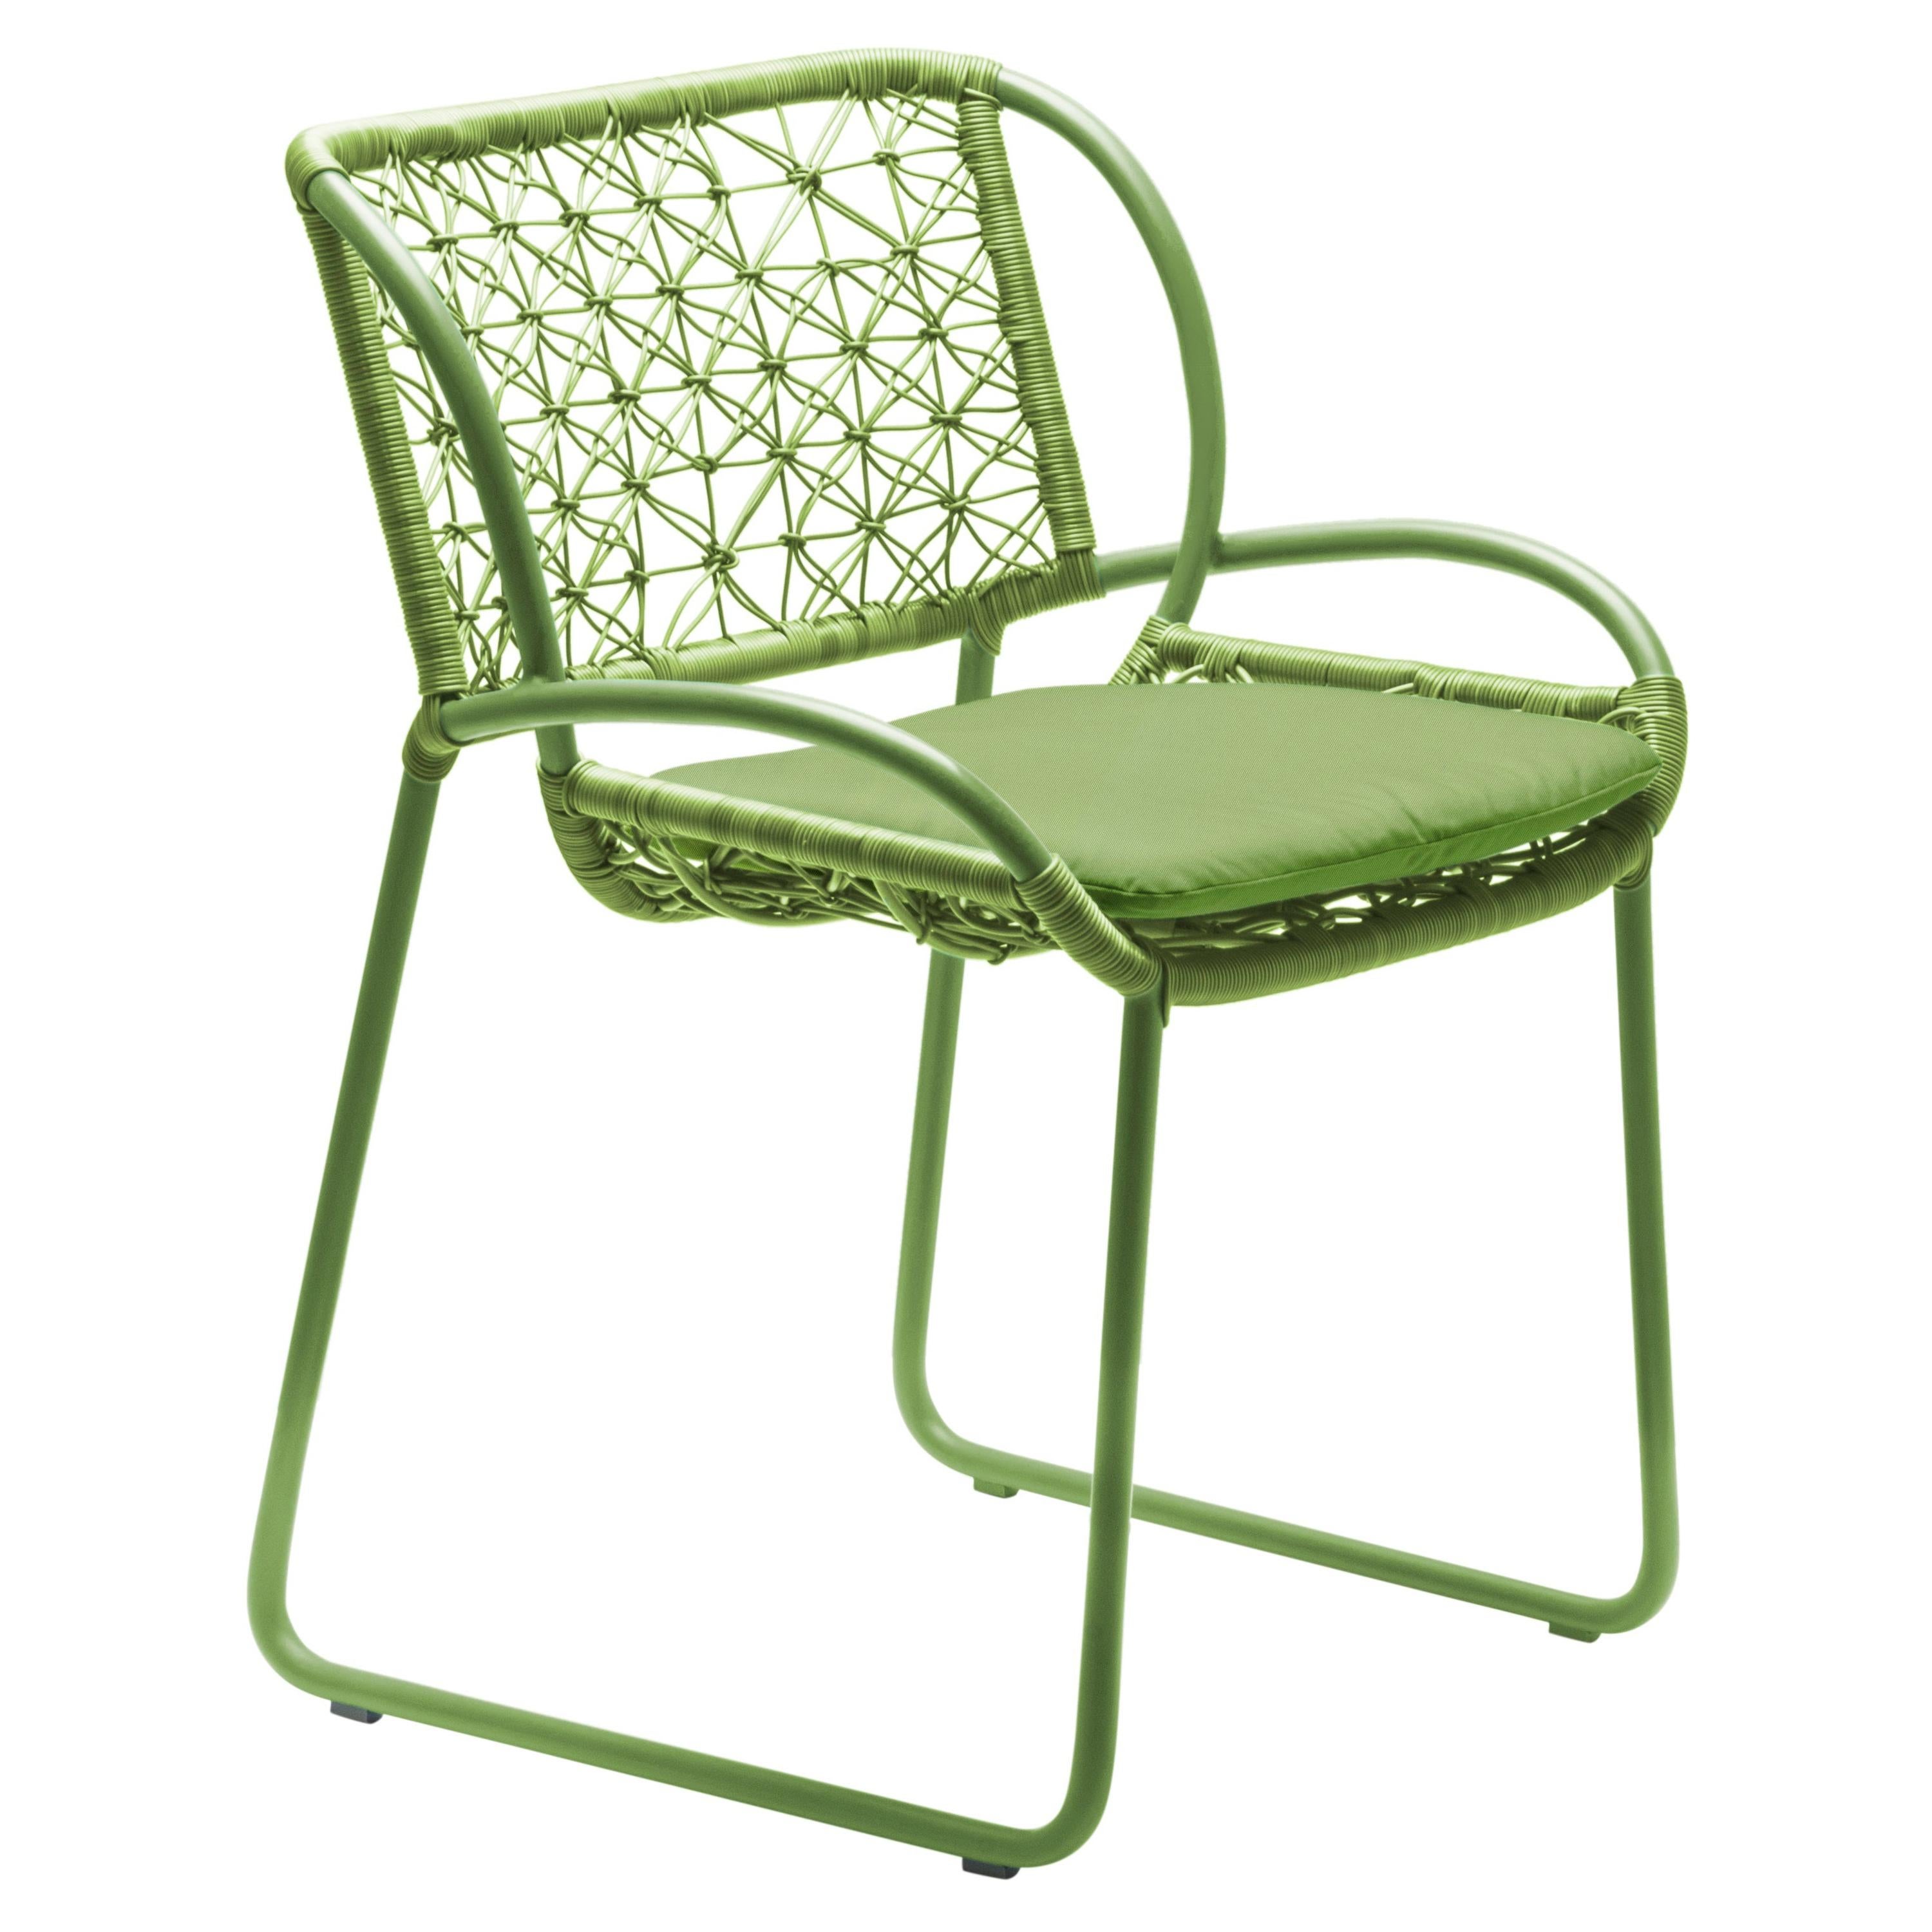 Adesso Lime Green Armchair by Kenneth Cobonpue For Sale